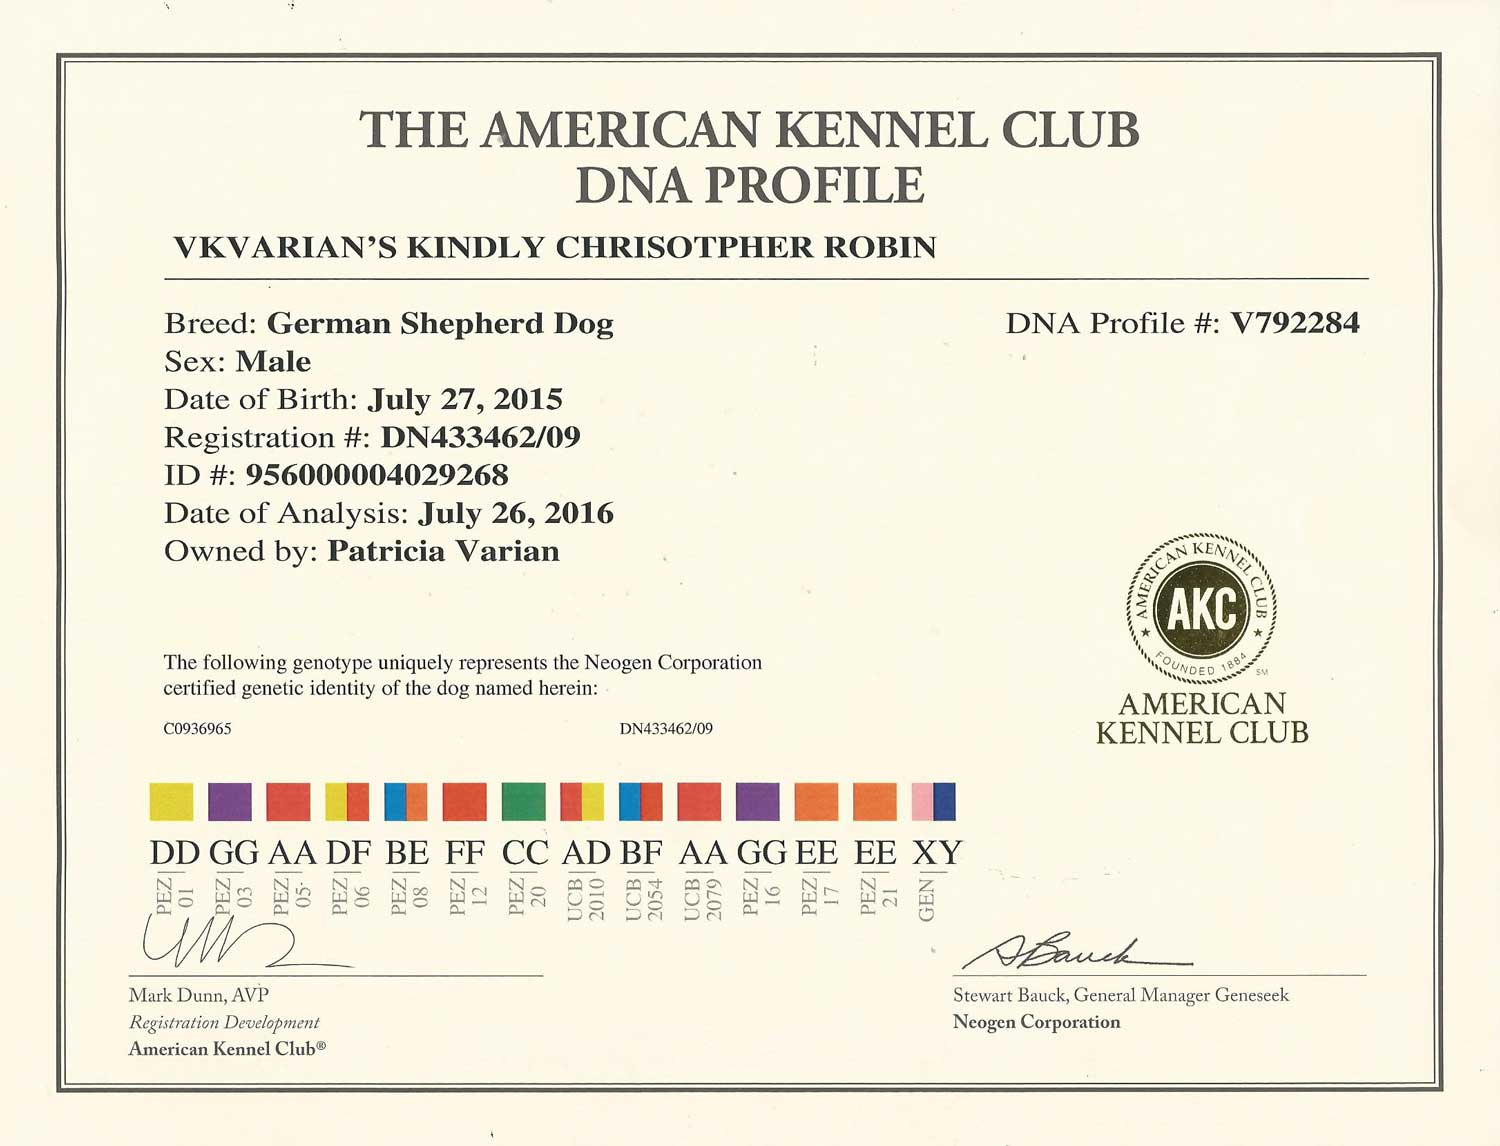 A certificate of authenticity for the american kennel club dna profile.